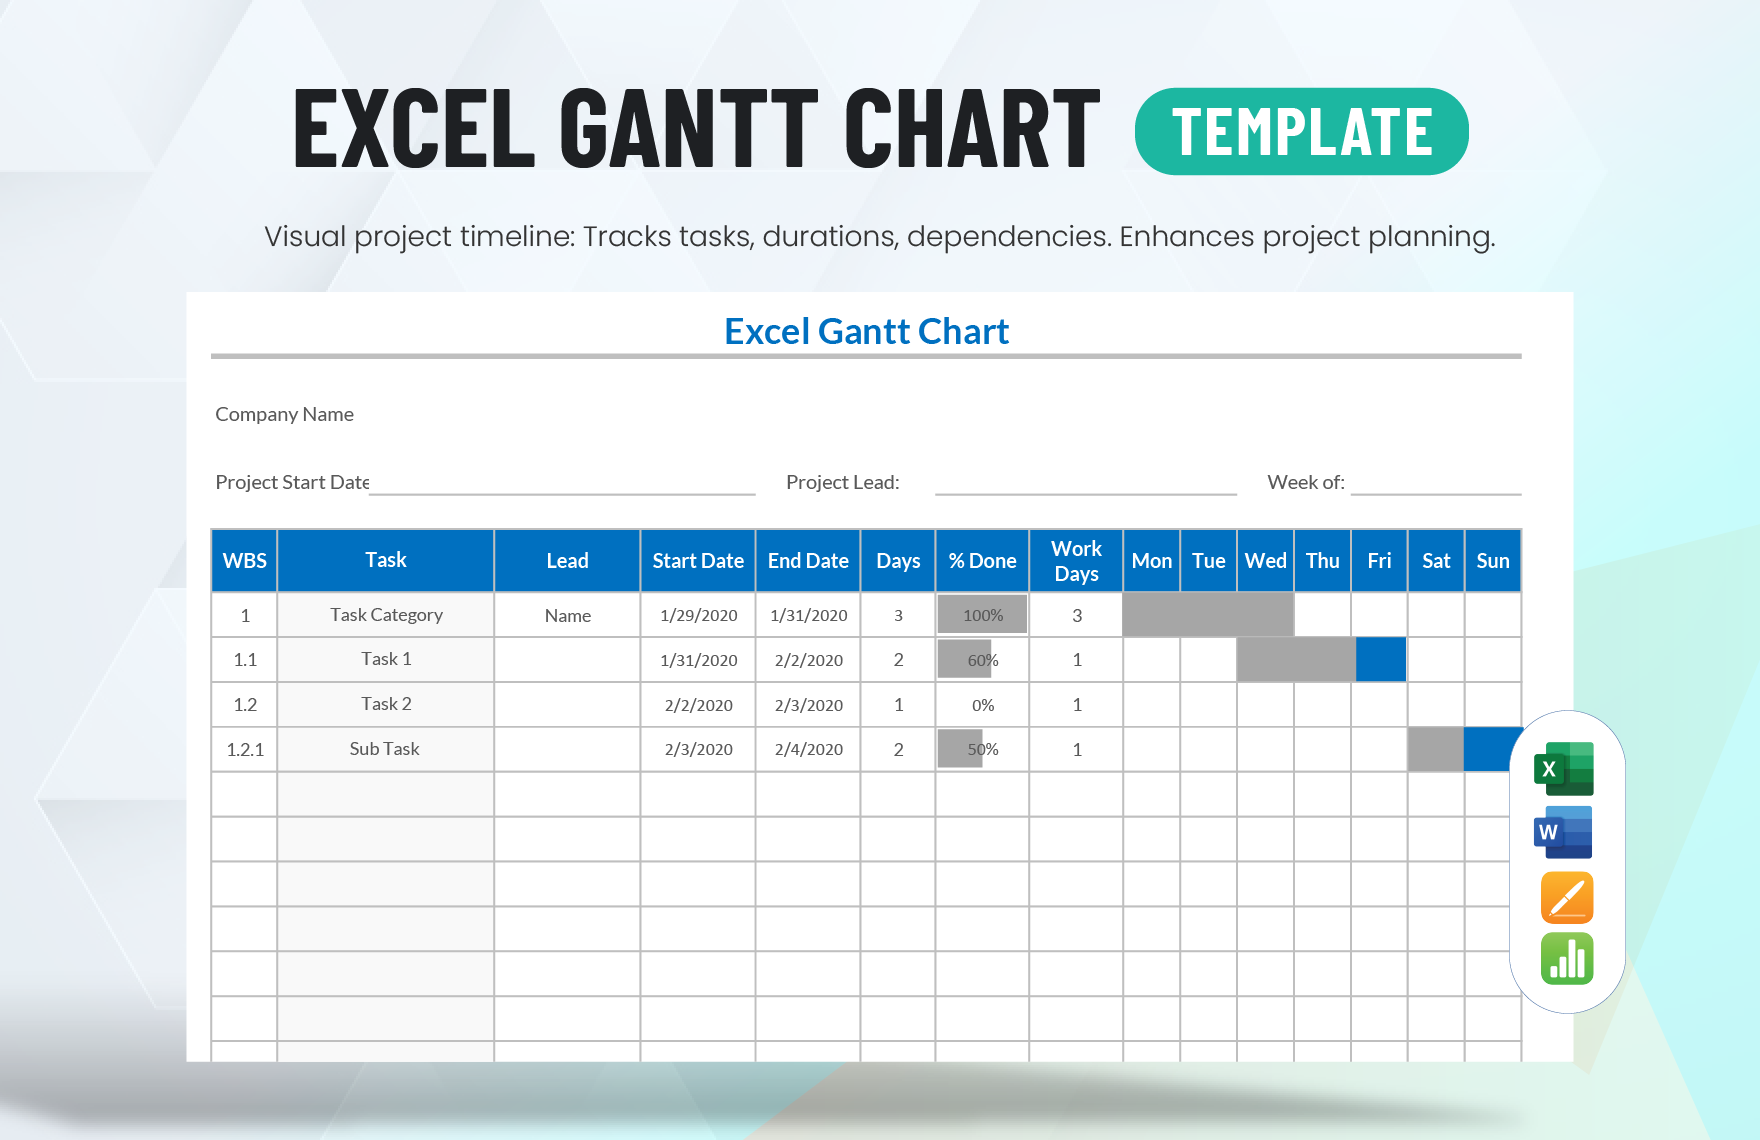 Excel Gantt Chart Template in Word, Excel, Apple Pages, Apple Numbers